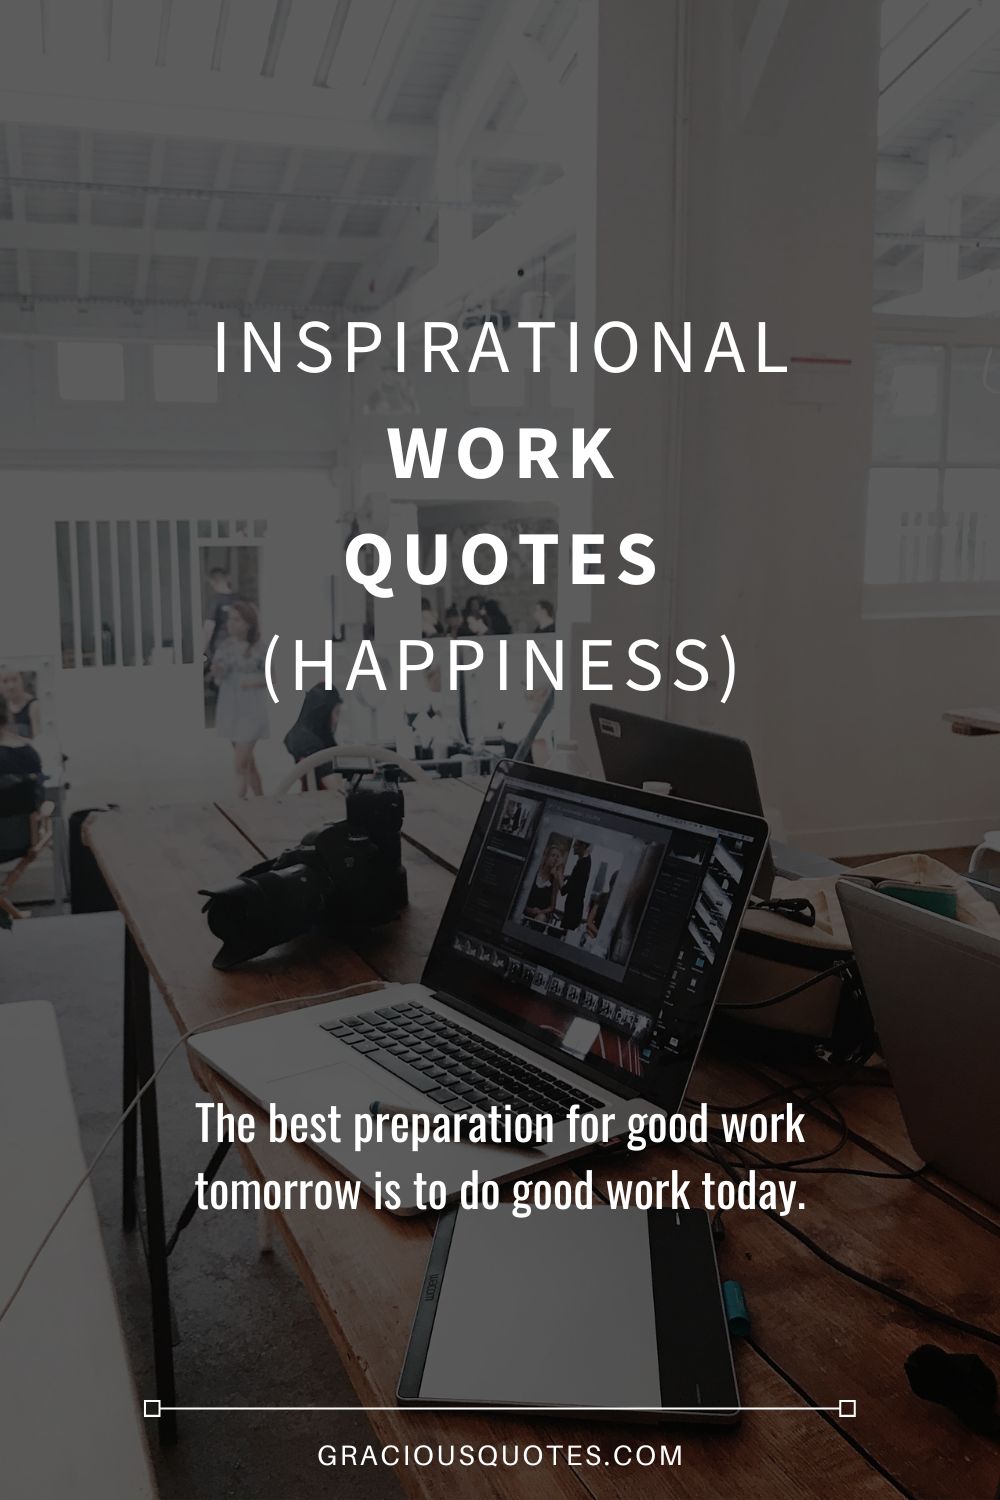 Inspirational Work Quotes (HAPPINESS) - Gracious Quotes